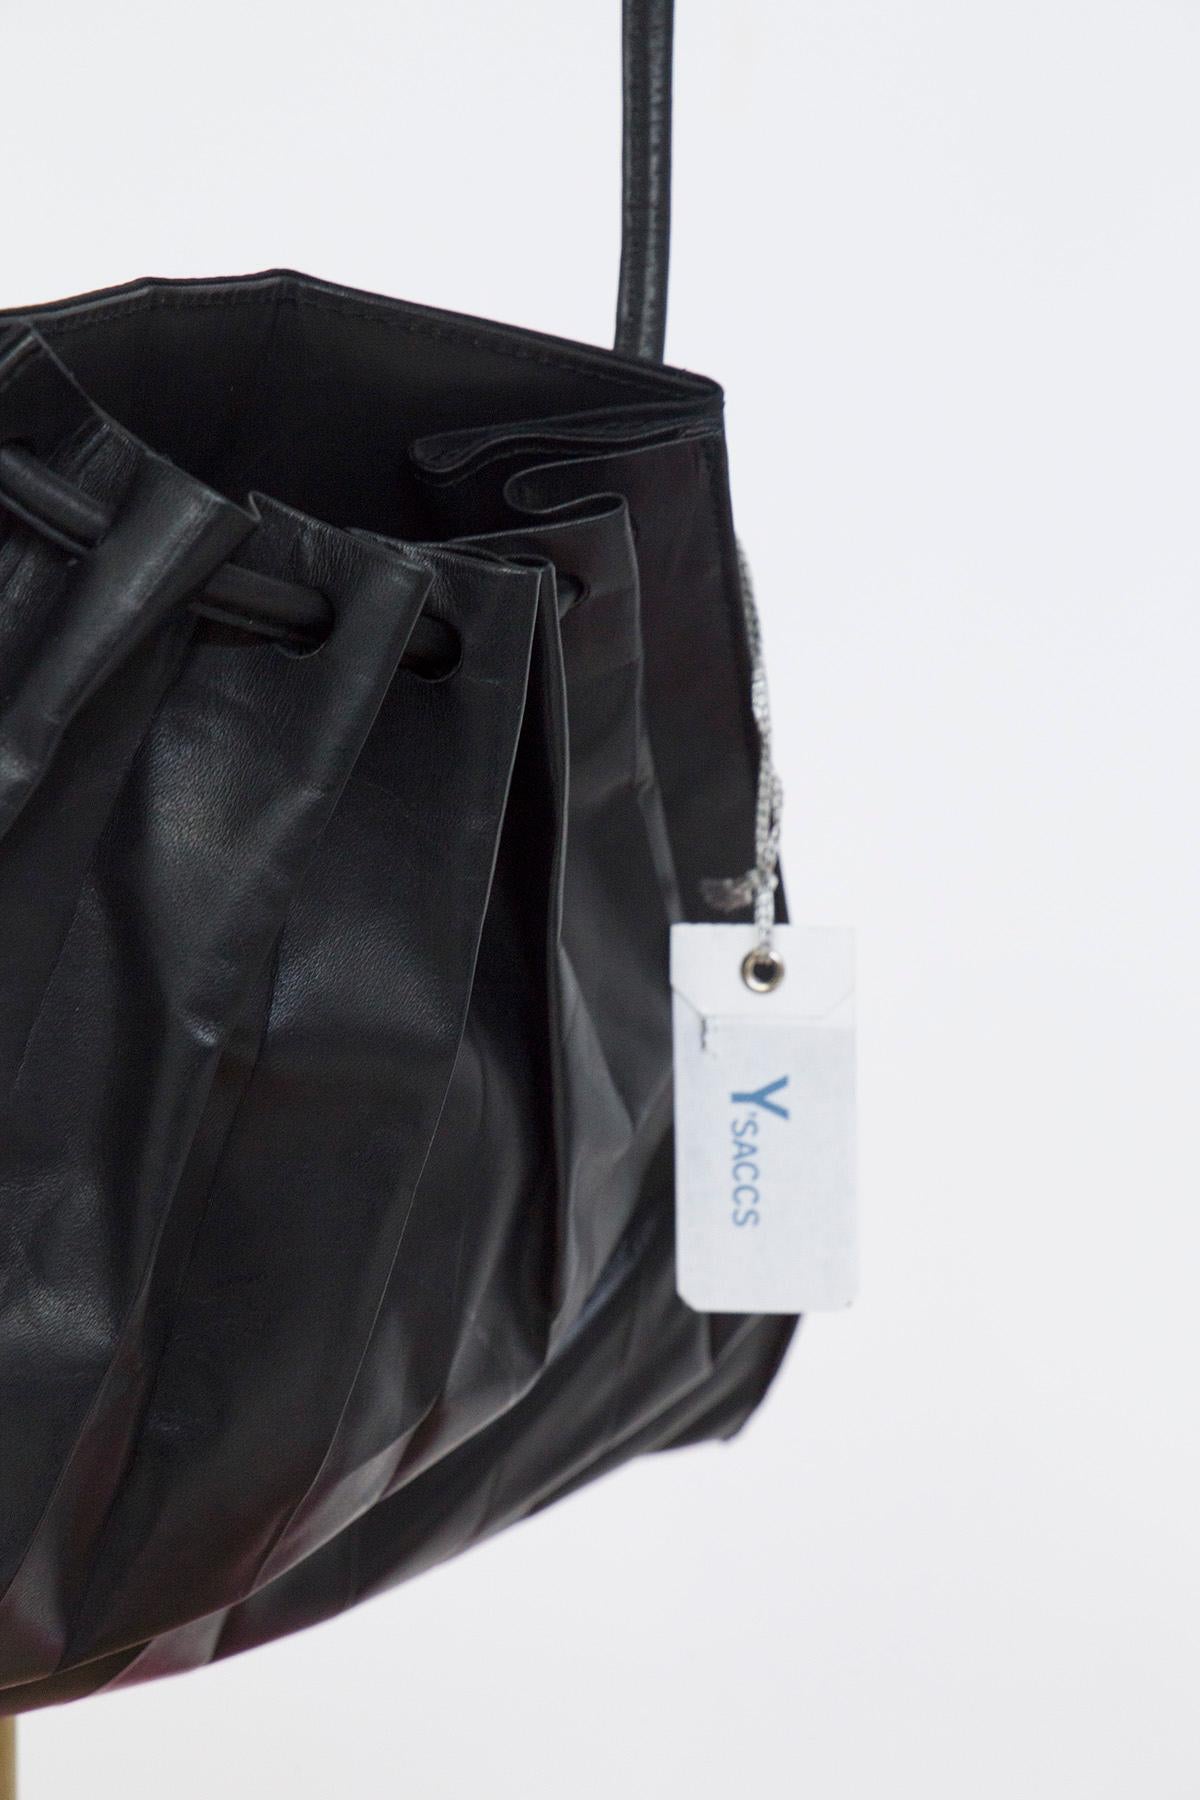 MIYAKE ISSEY Pleated Black Leather Bag For Sale 2